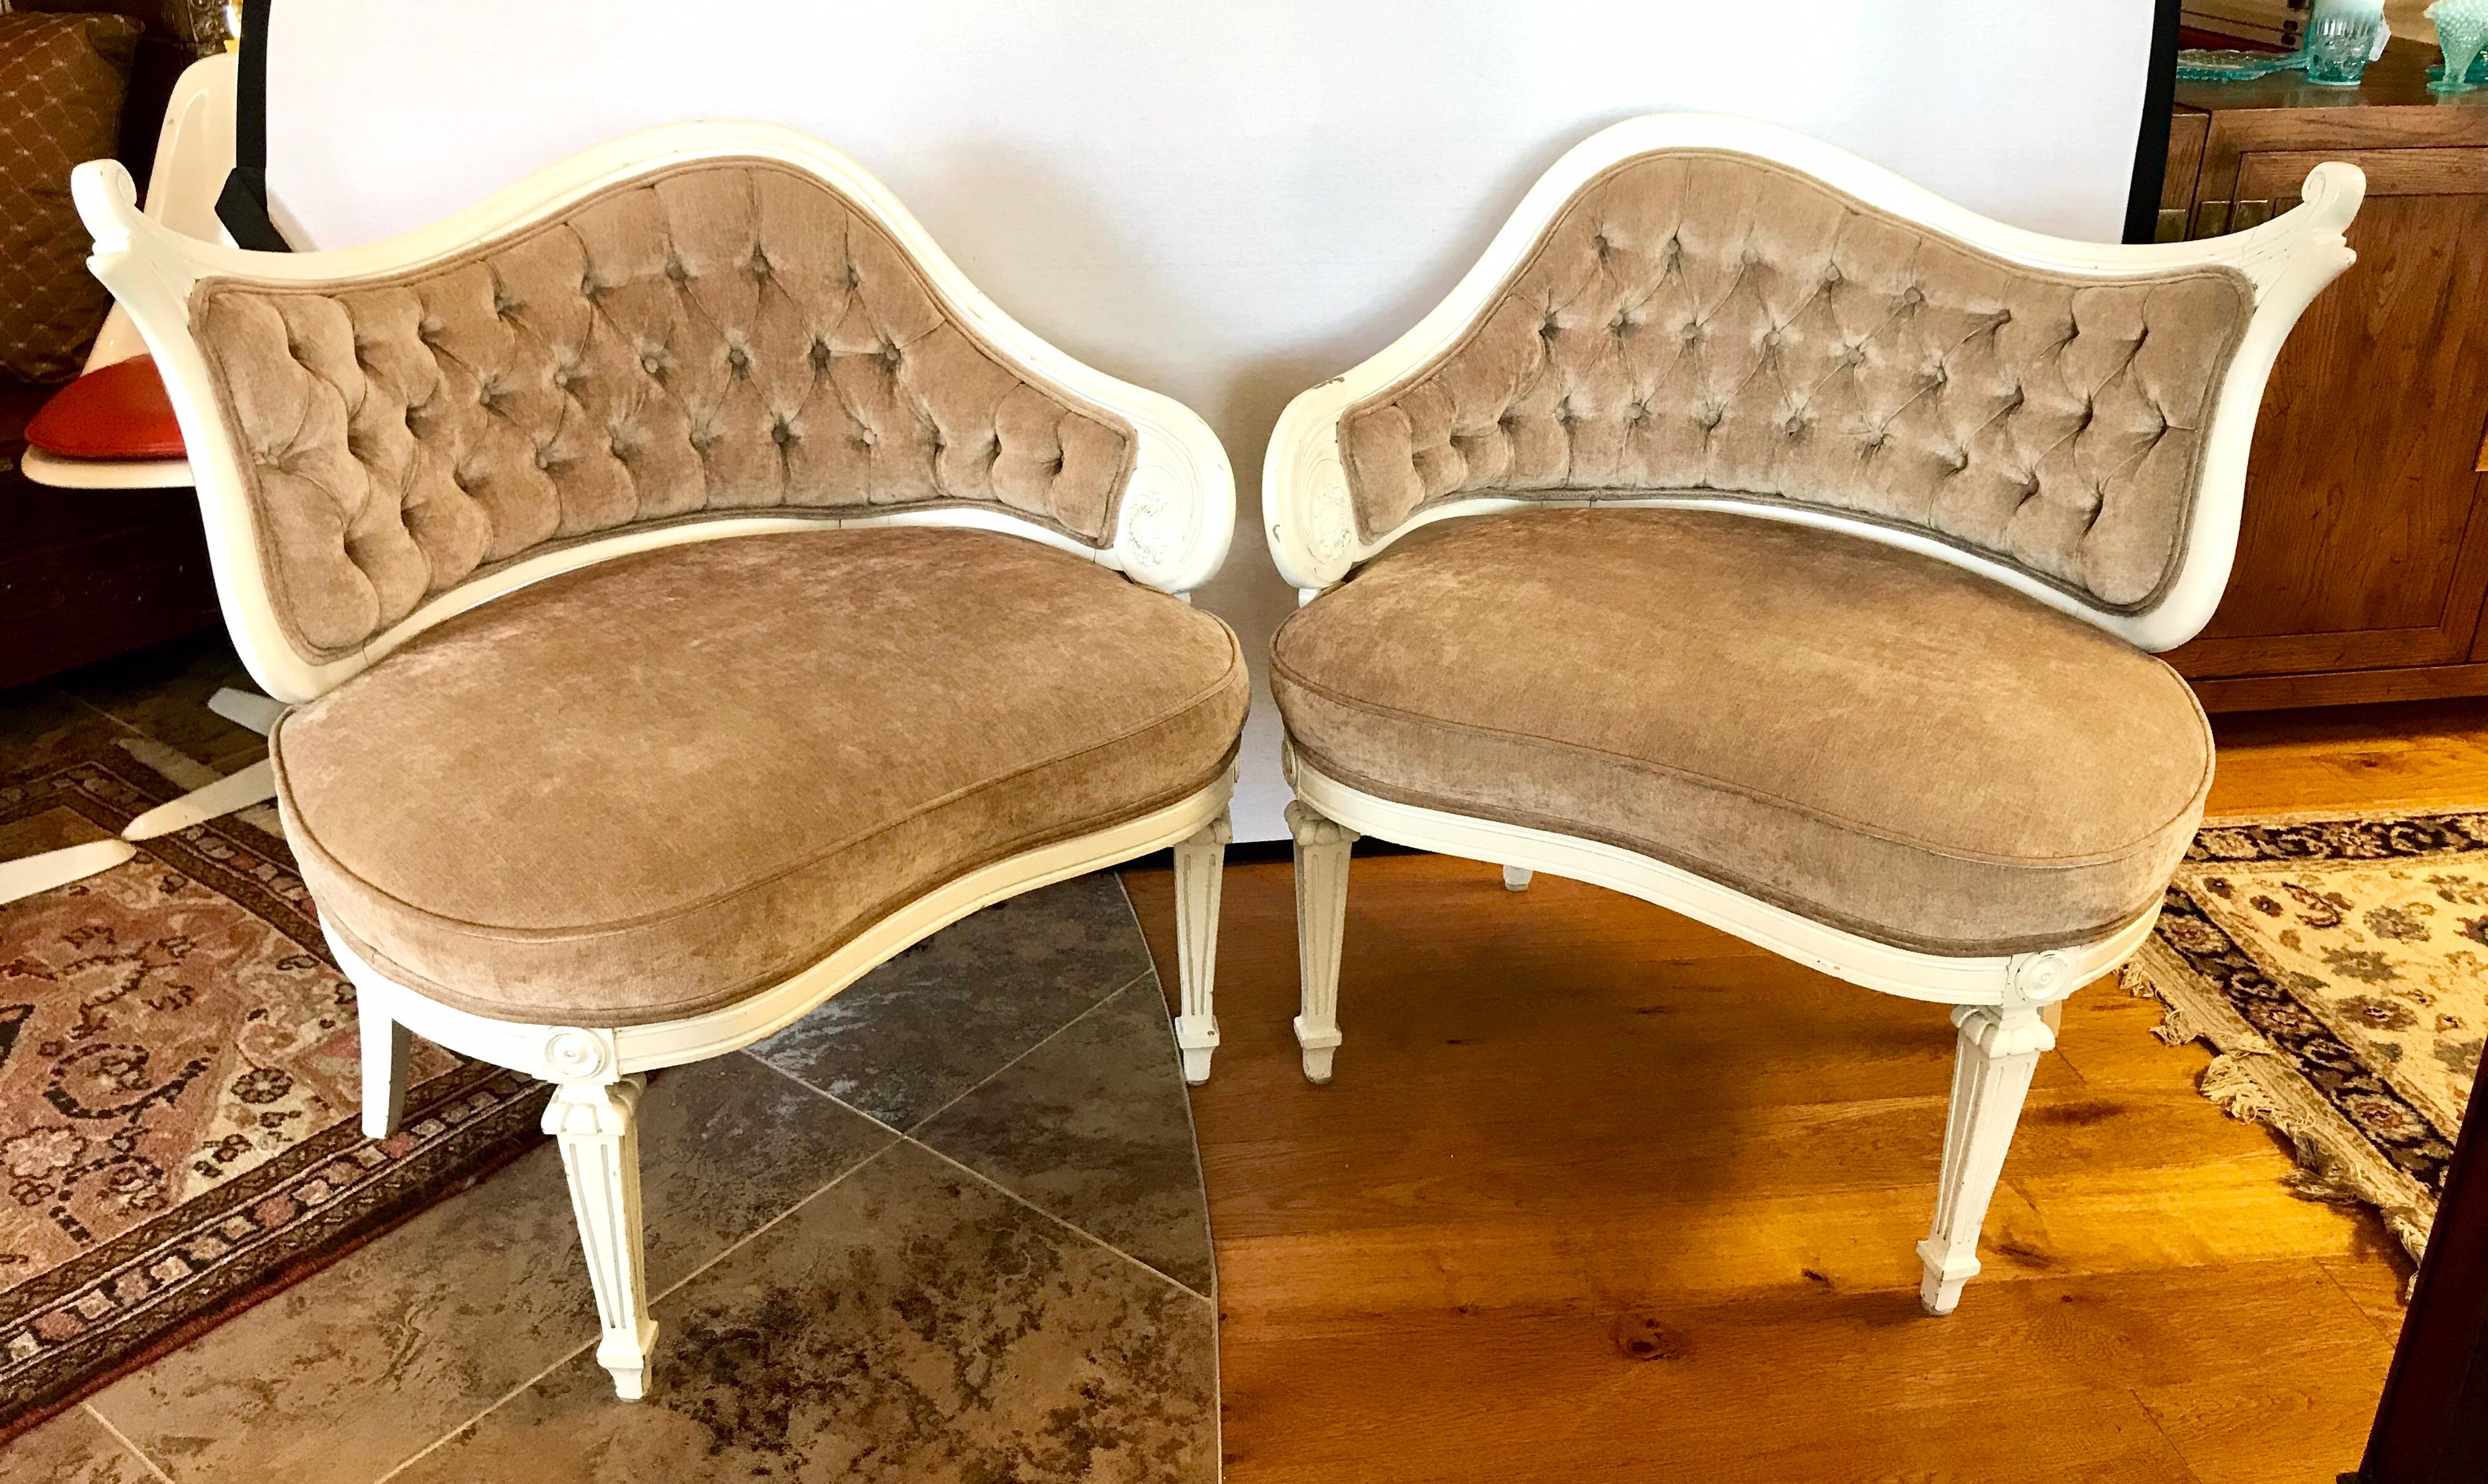 Unique, elegant tufted velvet chairs with a distressed white painted wood frame. Ultra-chic, this feminine velvet arm chair brings Parisian refinement to any room and makes for the perfect spot to curl up with a good book. This chair features a